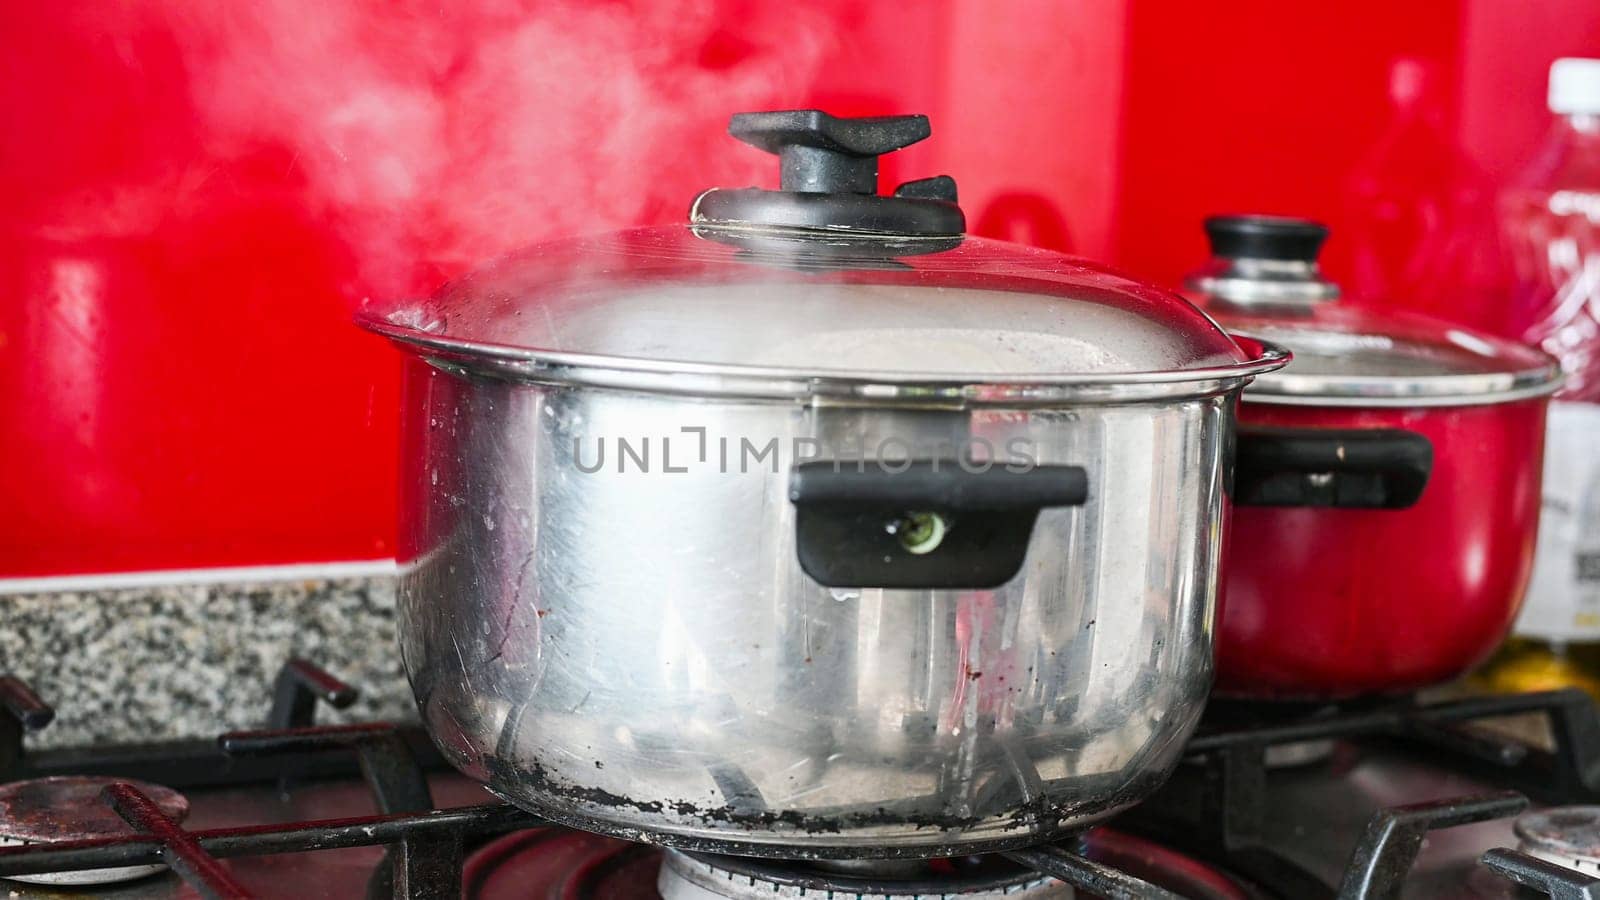 Steam or Vapour clouds rising from boiling water in saucepan on stove. Steam from pan while cooking